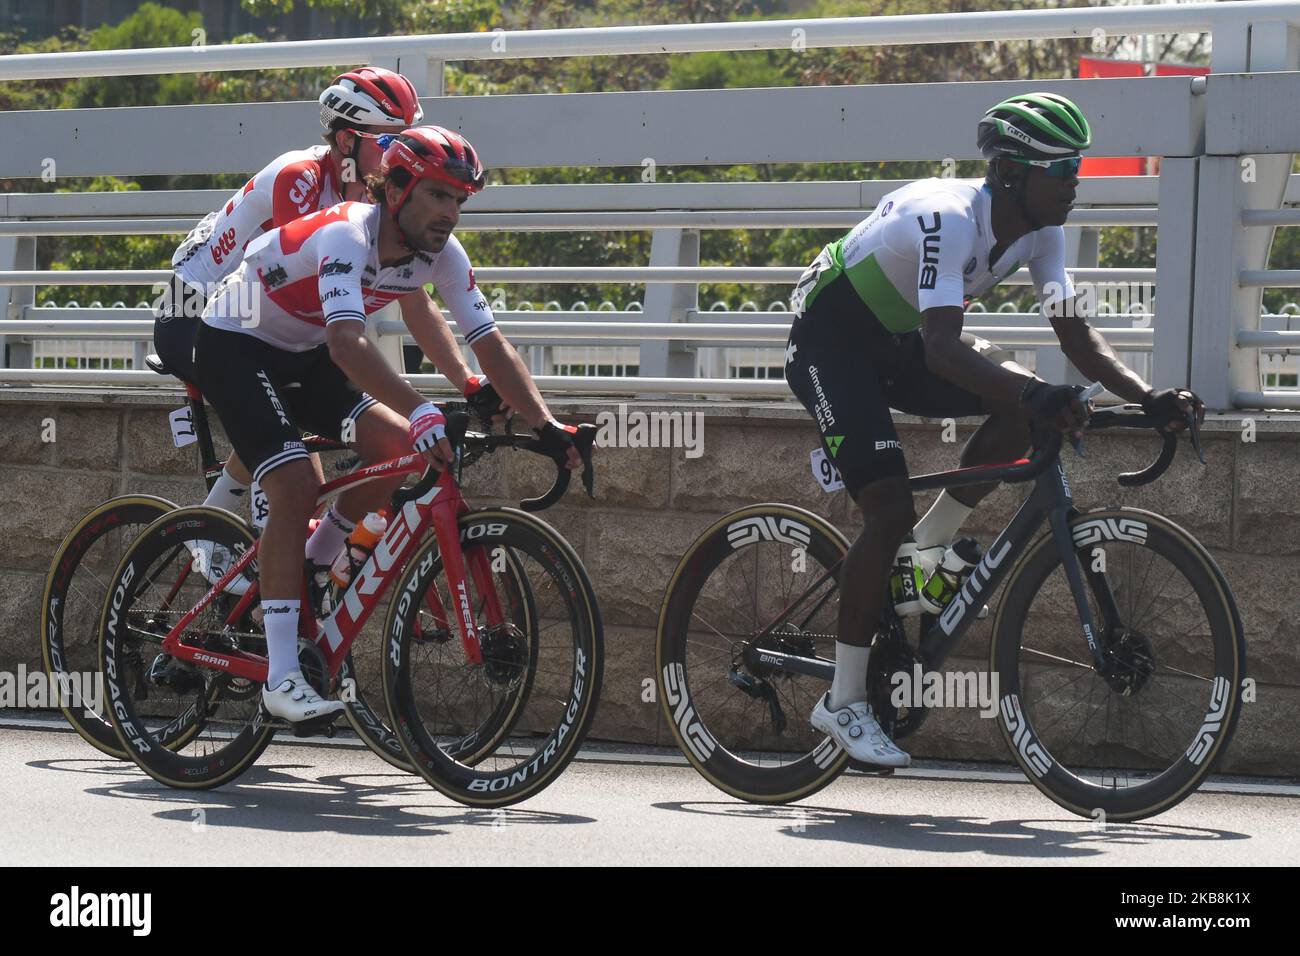 A breakaway of three riders (R-L) Nic Dlamini of South Africa and Team Dimension Data, Jacopo Mosca of Italy and Trek - Segafredo, and Brian van Goethem of Netherlands and Lotto Soudal,during the third stage, 143km Nanning Circuit Race stage, of the 3rd edition of the Cycling Tour de Guangxi 2019, . On Saturday, October 19, 2019, in Nanning, Guangxi Region, China. (Photo by Artur Widak/NurPhoto) Stock Photo